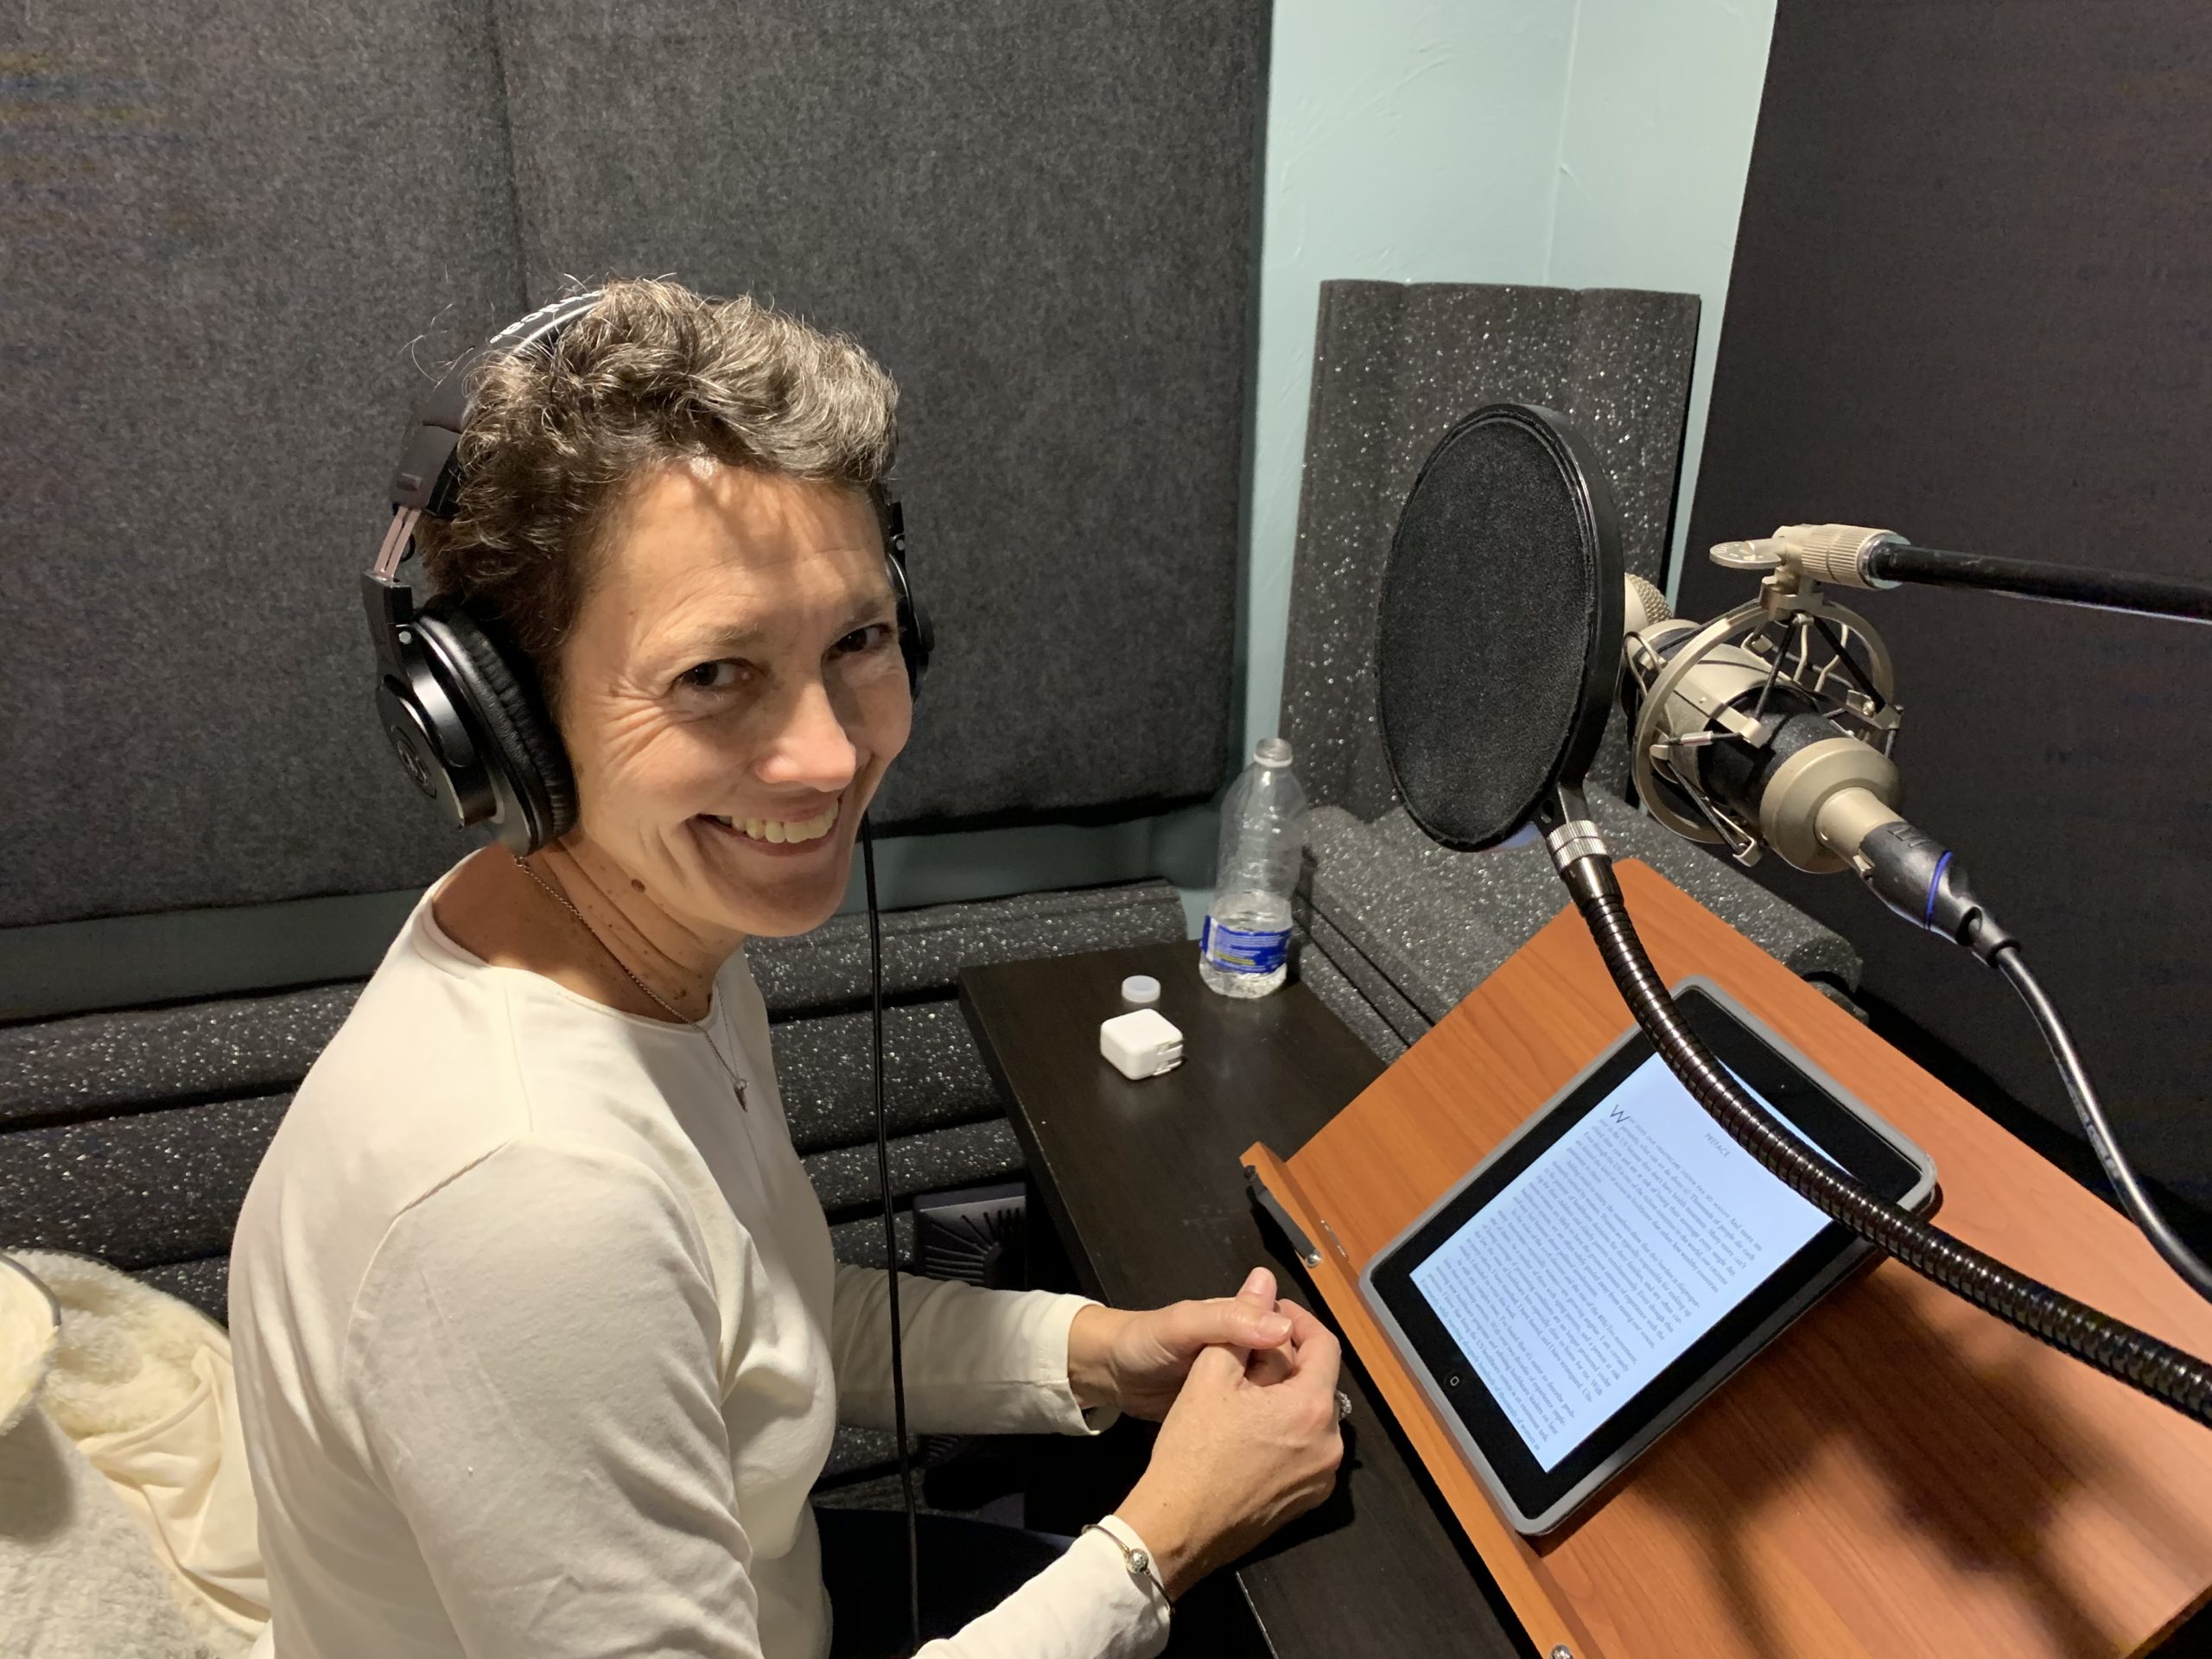 In Studio – Rosemarie Day records material for her upcoming release “Marching Toward Coverage – How Women Can Lead the Fight For Universal Coverage”